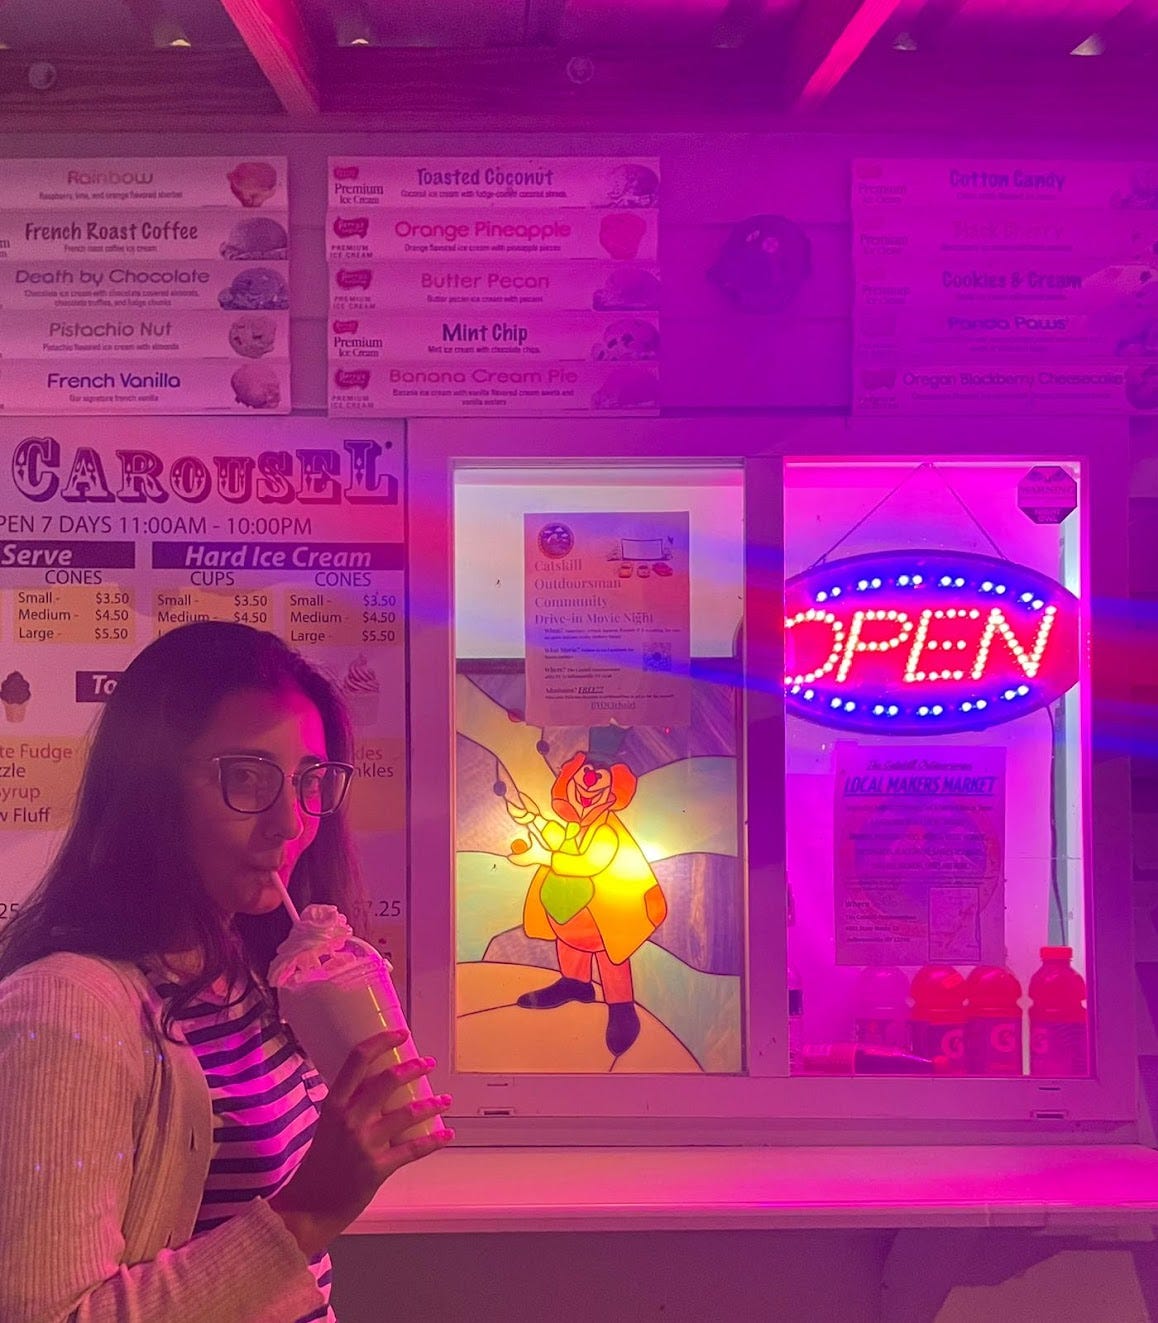 A young woman with black hair and glasses drinks a milkshake in front of an ice cream stand